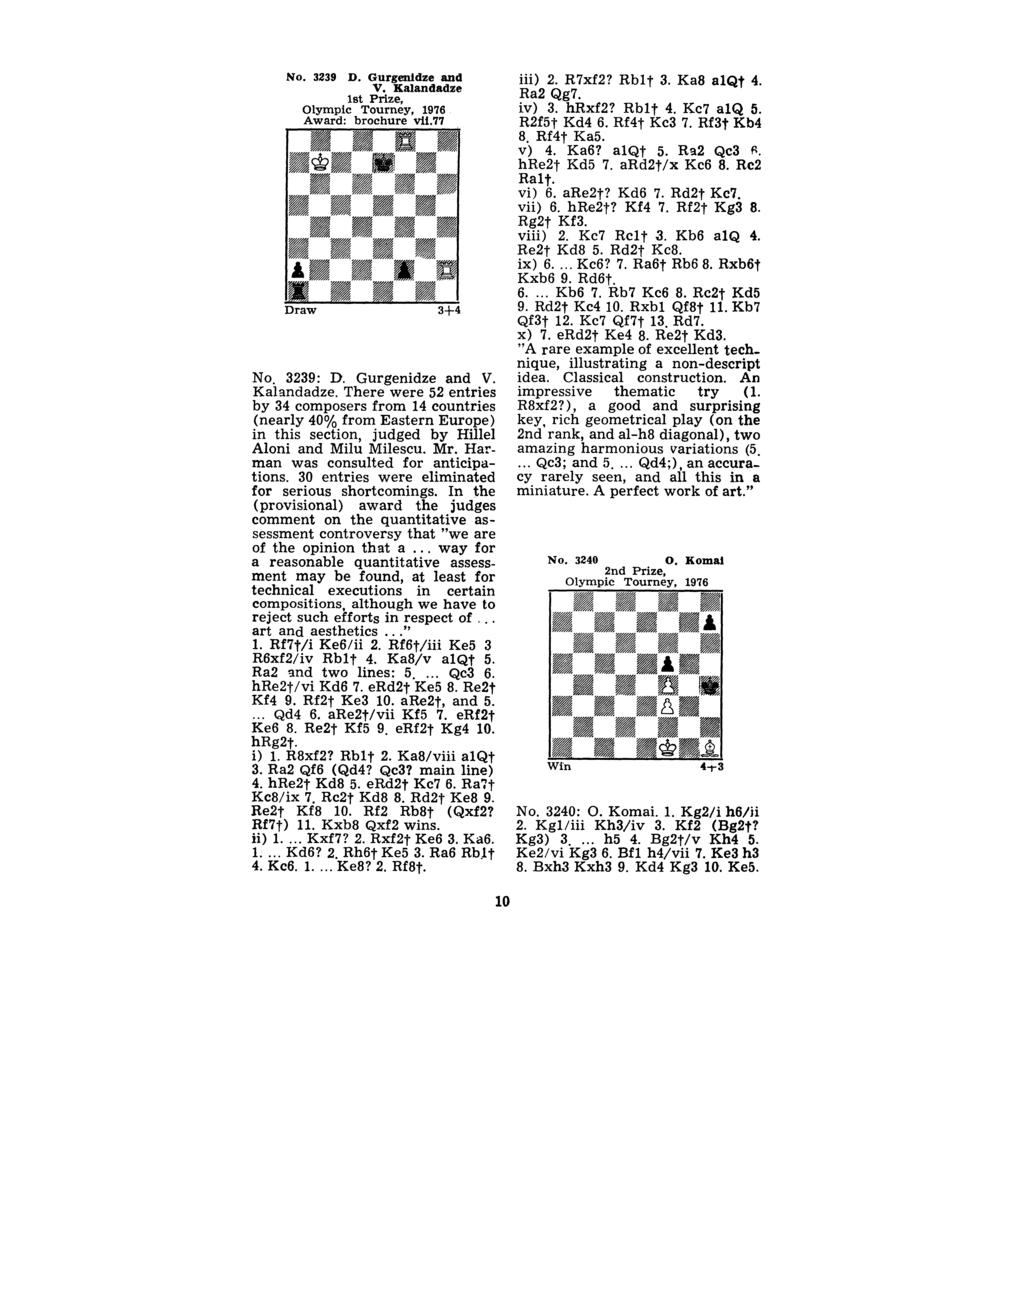 No. 3239 D. Gurgenldze and V. Kalandadze 1st Prize, Olympic Tourney, Award: brochure vli.77 Draw 3+4 No. 3239: D. Gurgenidze and V. Kalandadze. There were 52 entries by 34 composers from 14 countries (nearly 40% from Eastern Europe) in this section, judged by Hillel Aloni and Milu Milescu.